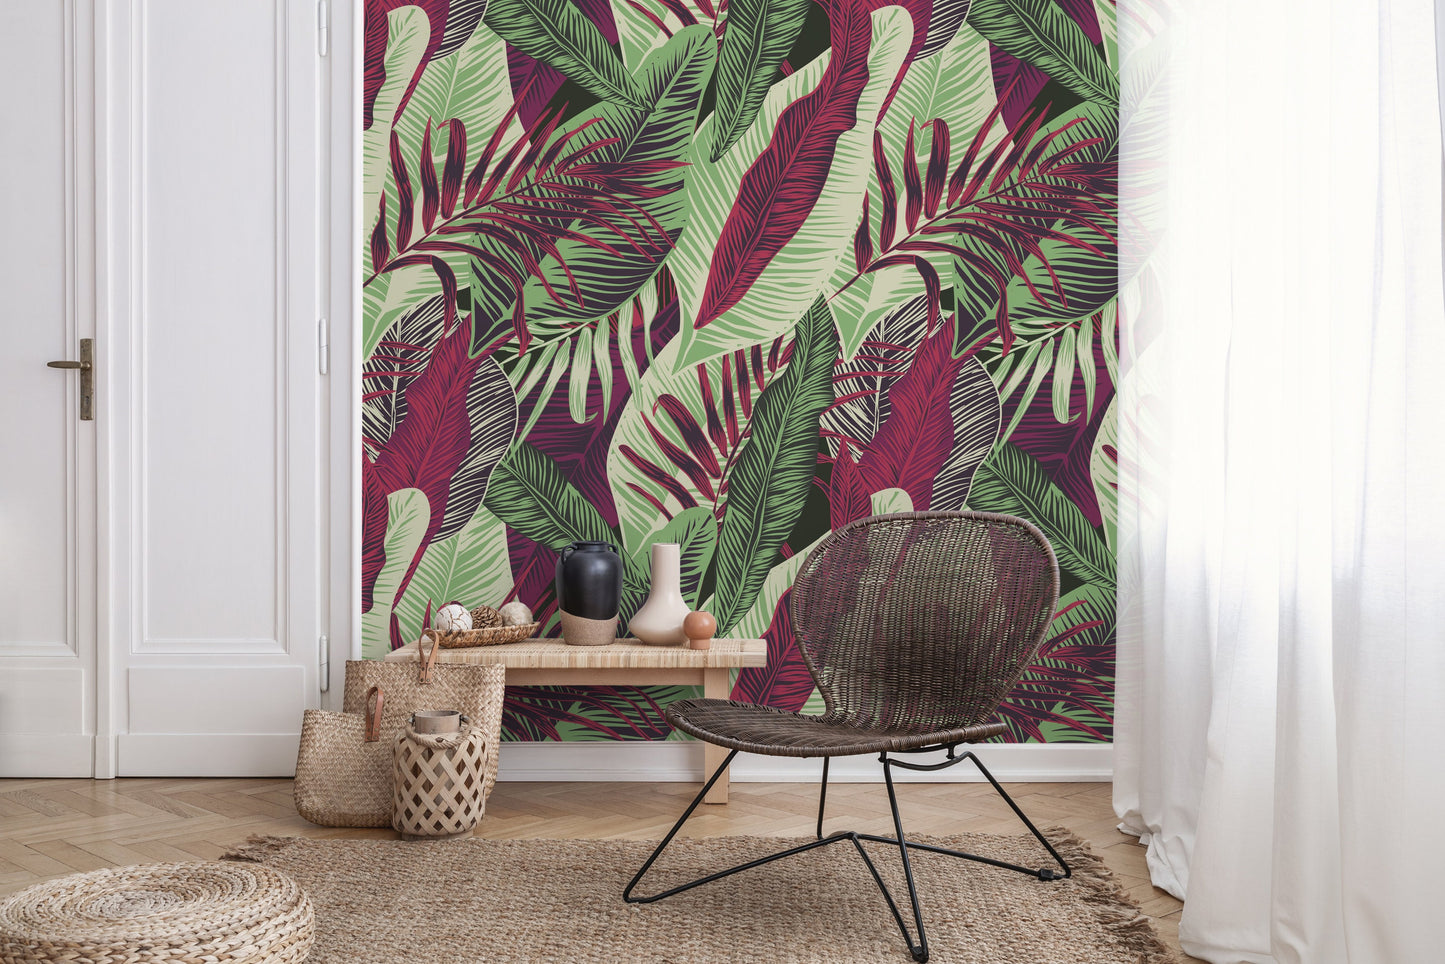 Wallpaper Peel and Stick Wallpaper Removable Wallpaper Home Decor Wall Decor Room Decor/ Red and Green Cool Tropical Leaves Wallpaper -B132